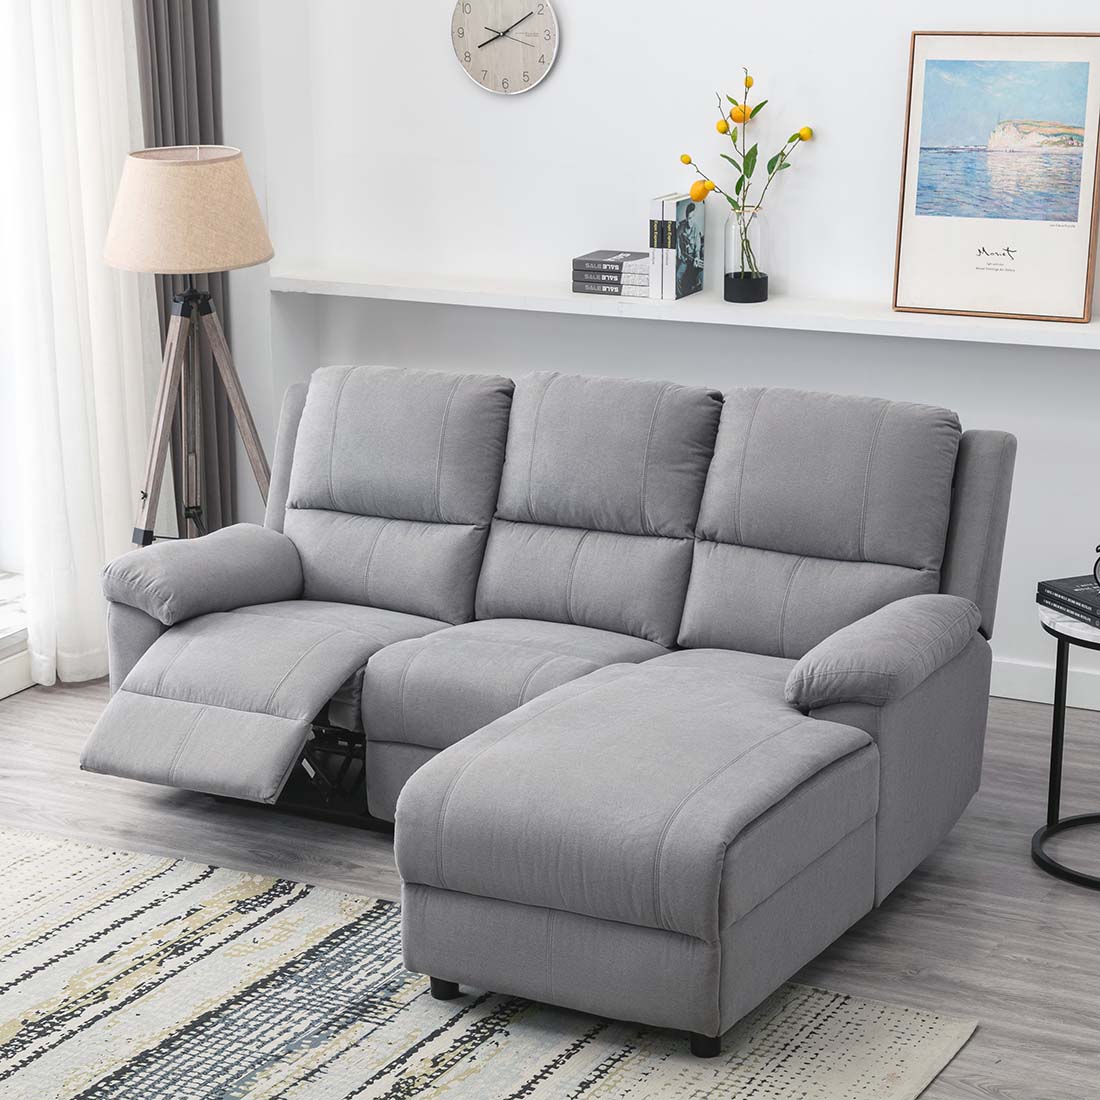 Valencia Fabric Chaise 3 Seater High